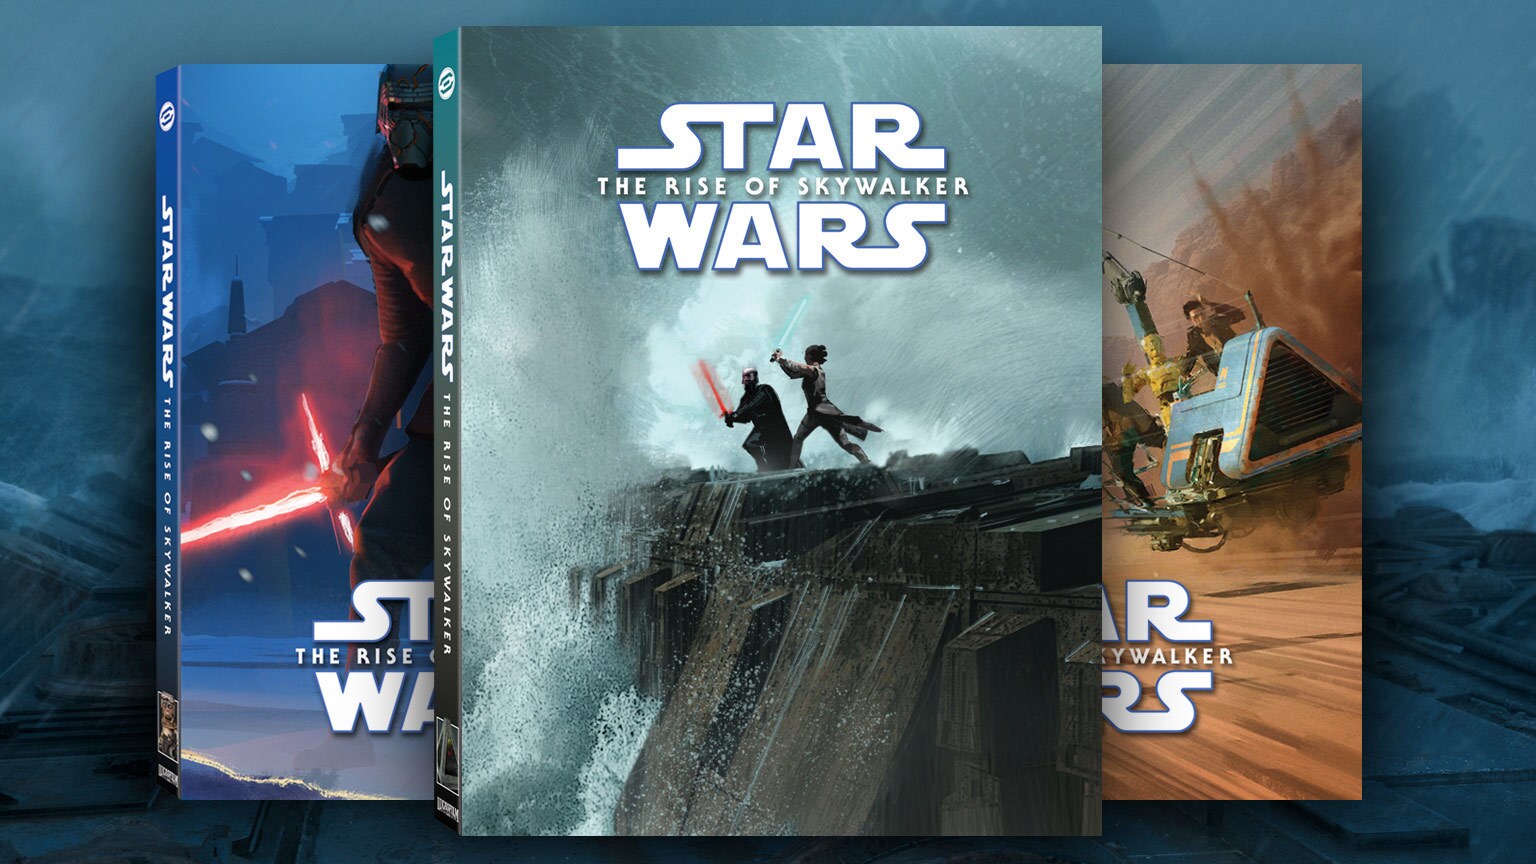 Customize Your Copy of Star Wars: The Rise of Skywalker with StarWars.com’s Exclusive Covers